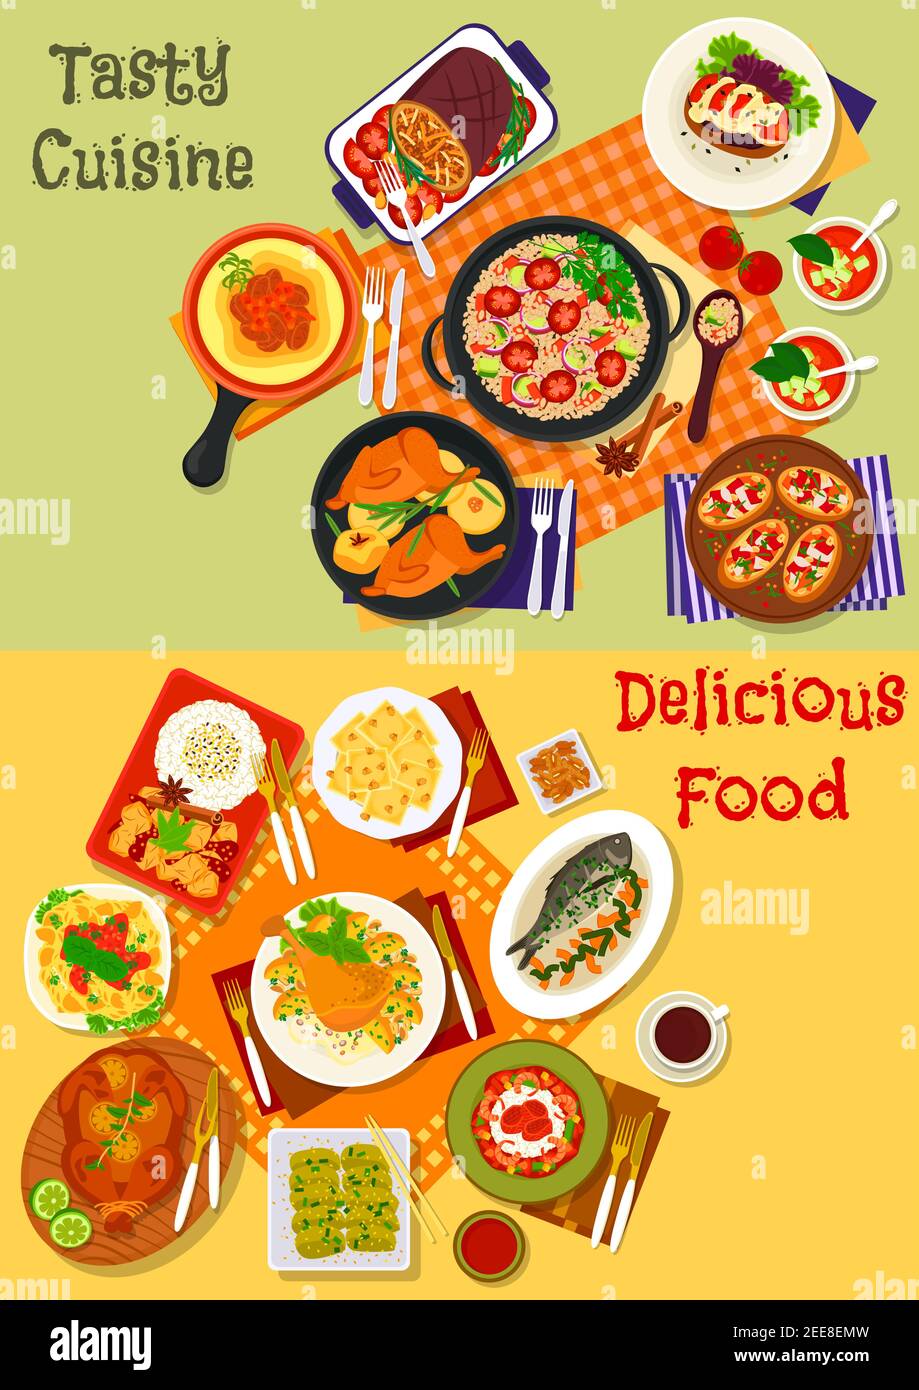 World cuisine popular dinner dishes icon set with italian pasta and pepper bruschetta, spanish tomato soup, seafood rice and vegetable salad, fried ch Stock Vector